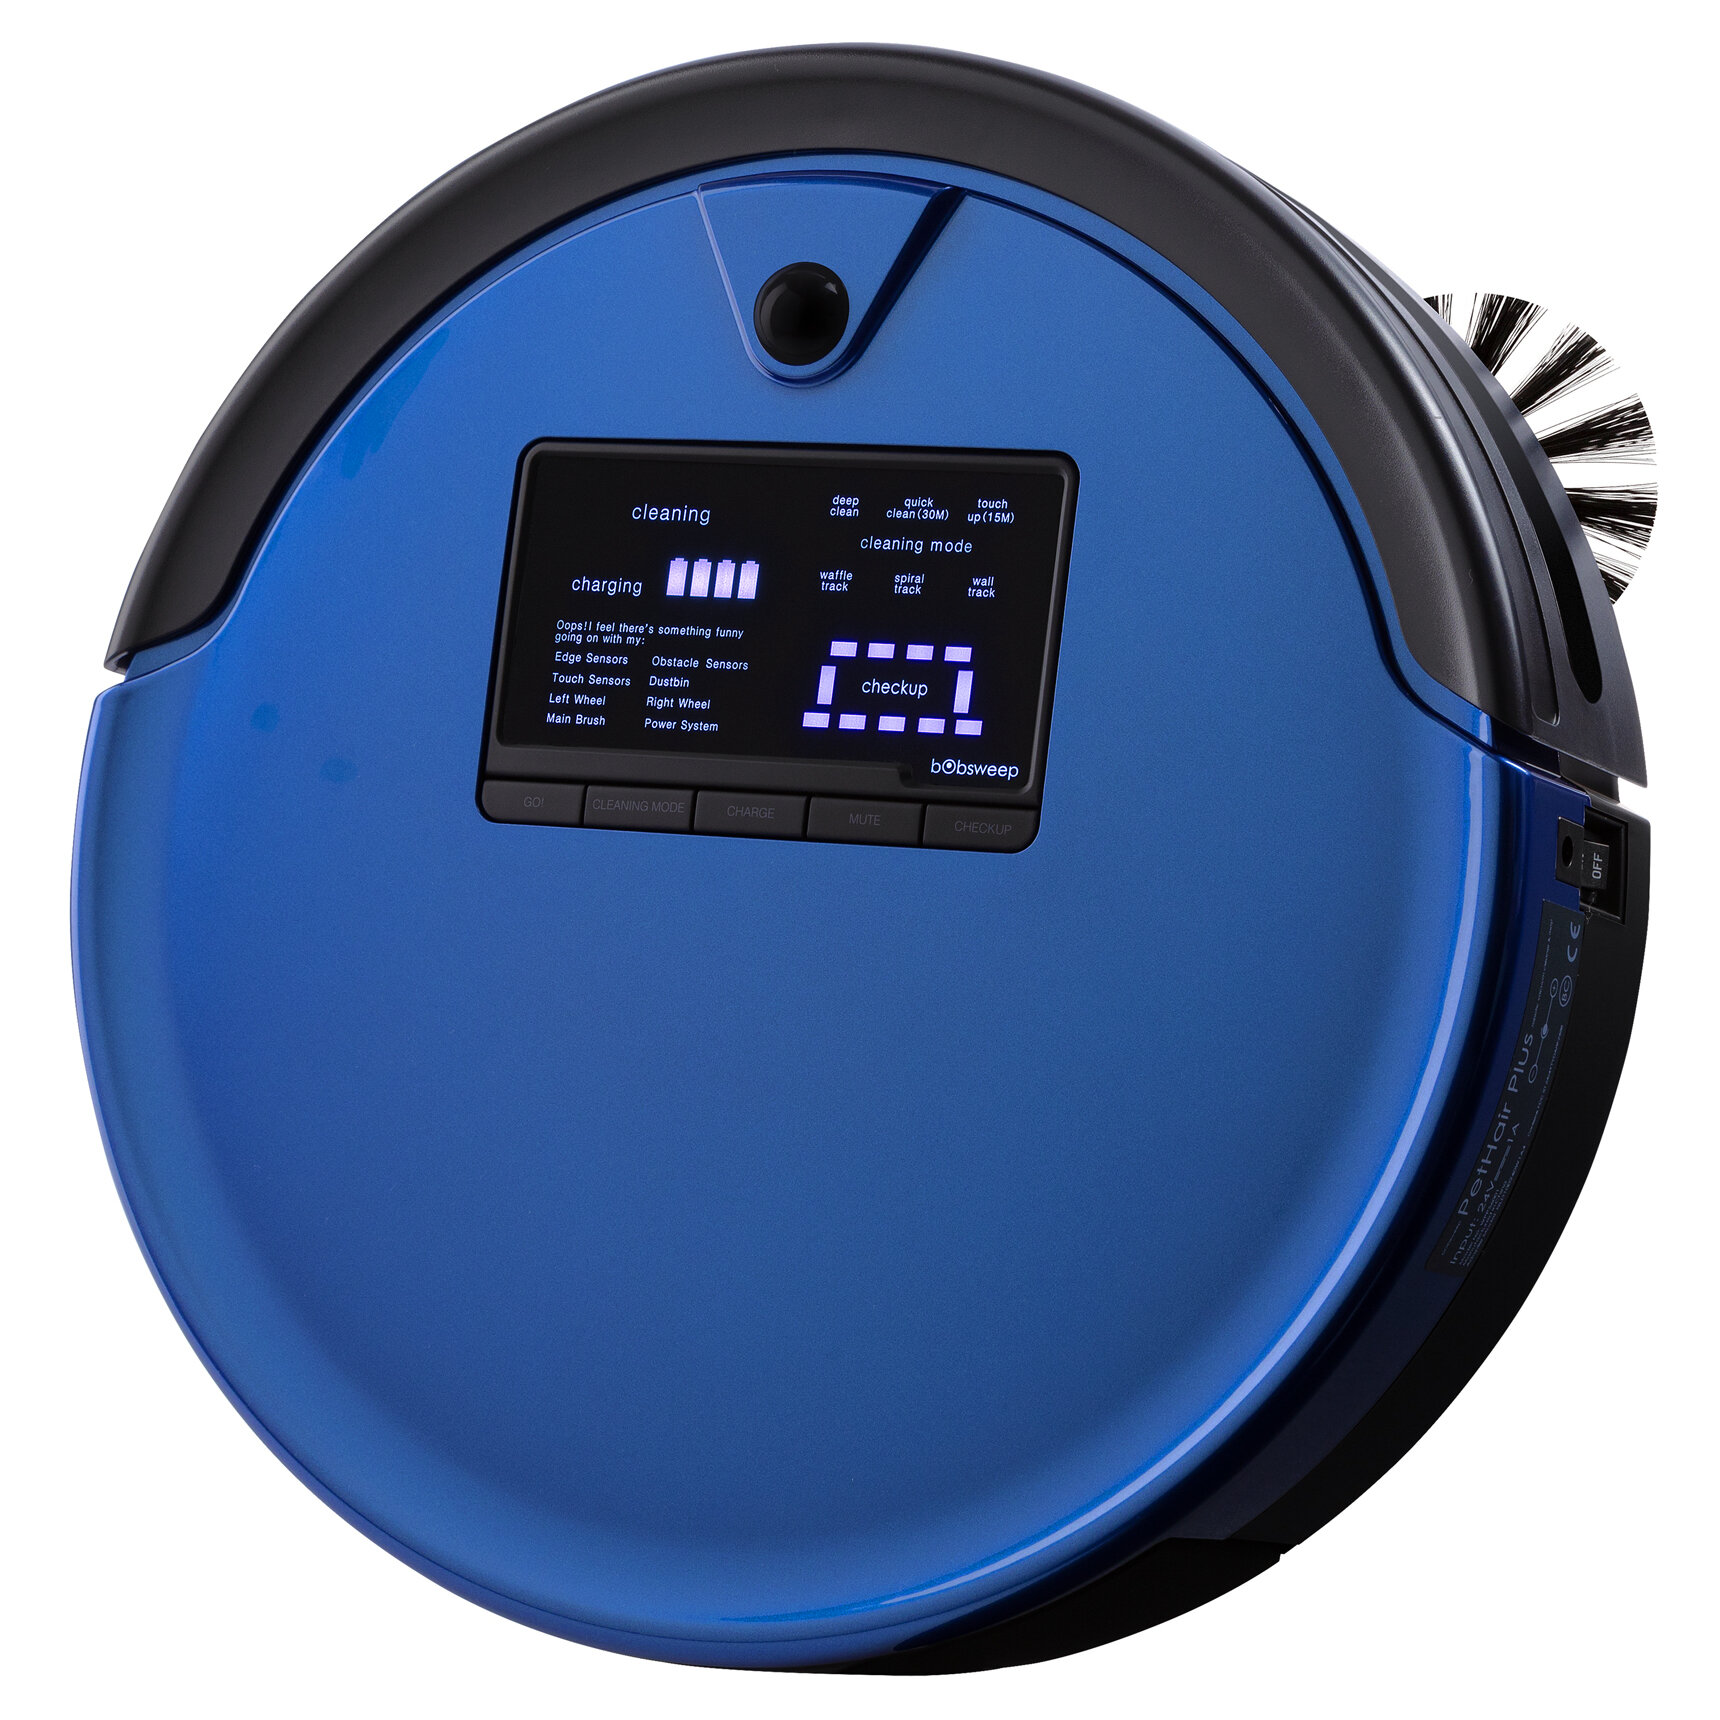 Rechargeable Automatic Smart Robot Vacuum Cleaner Edge Cleaning Suction Sweeper for Pet Hair Robot Vacuum Free Size, Blue Carpets/&Hard Floors